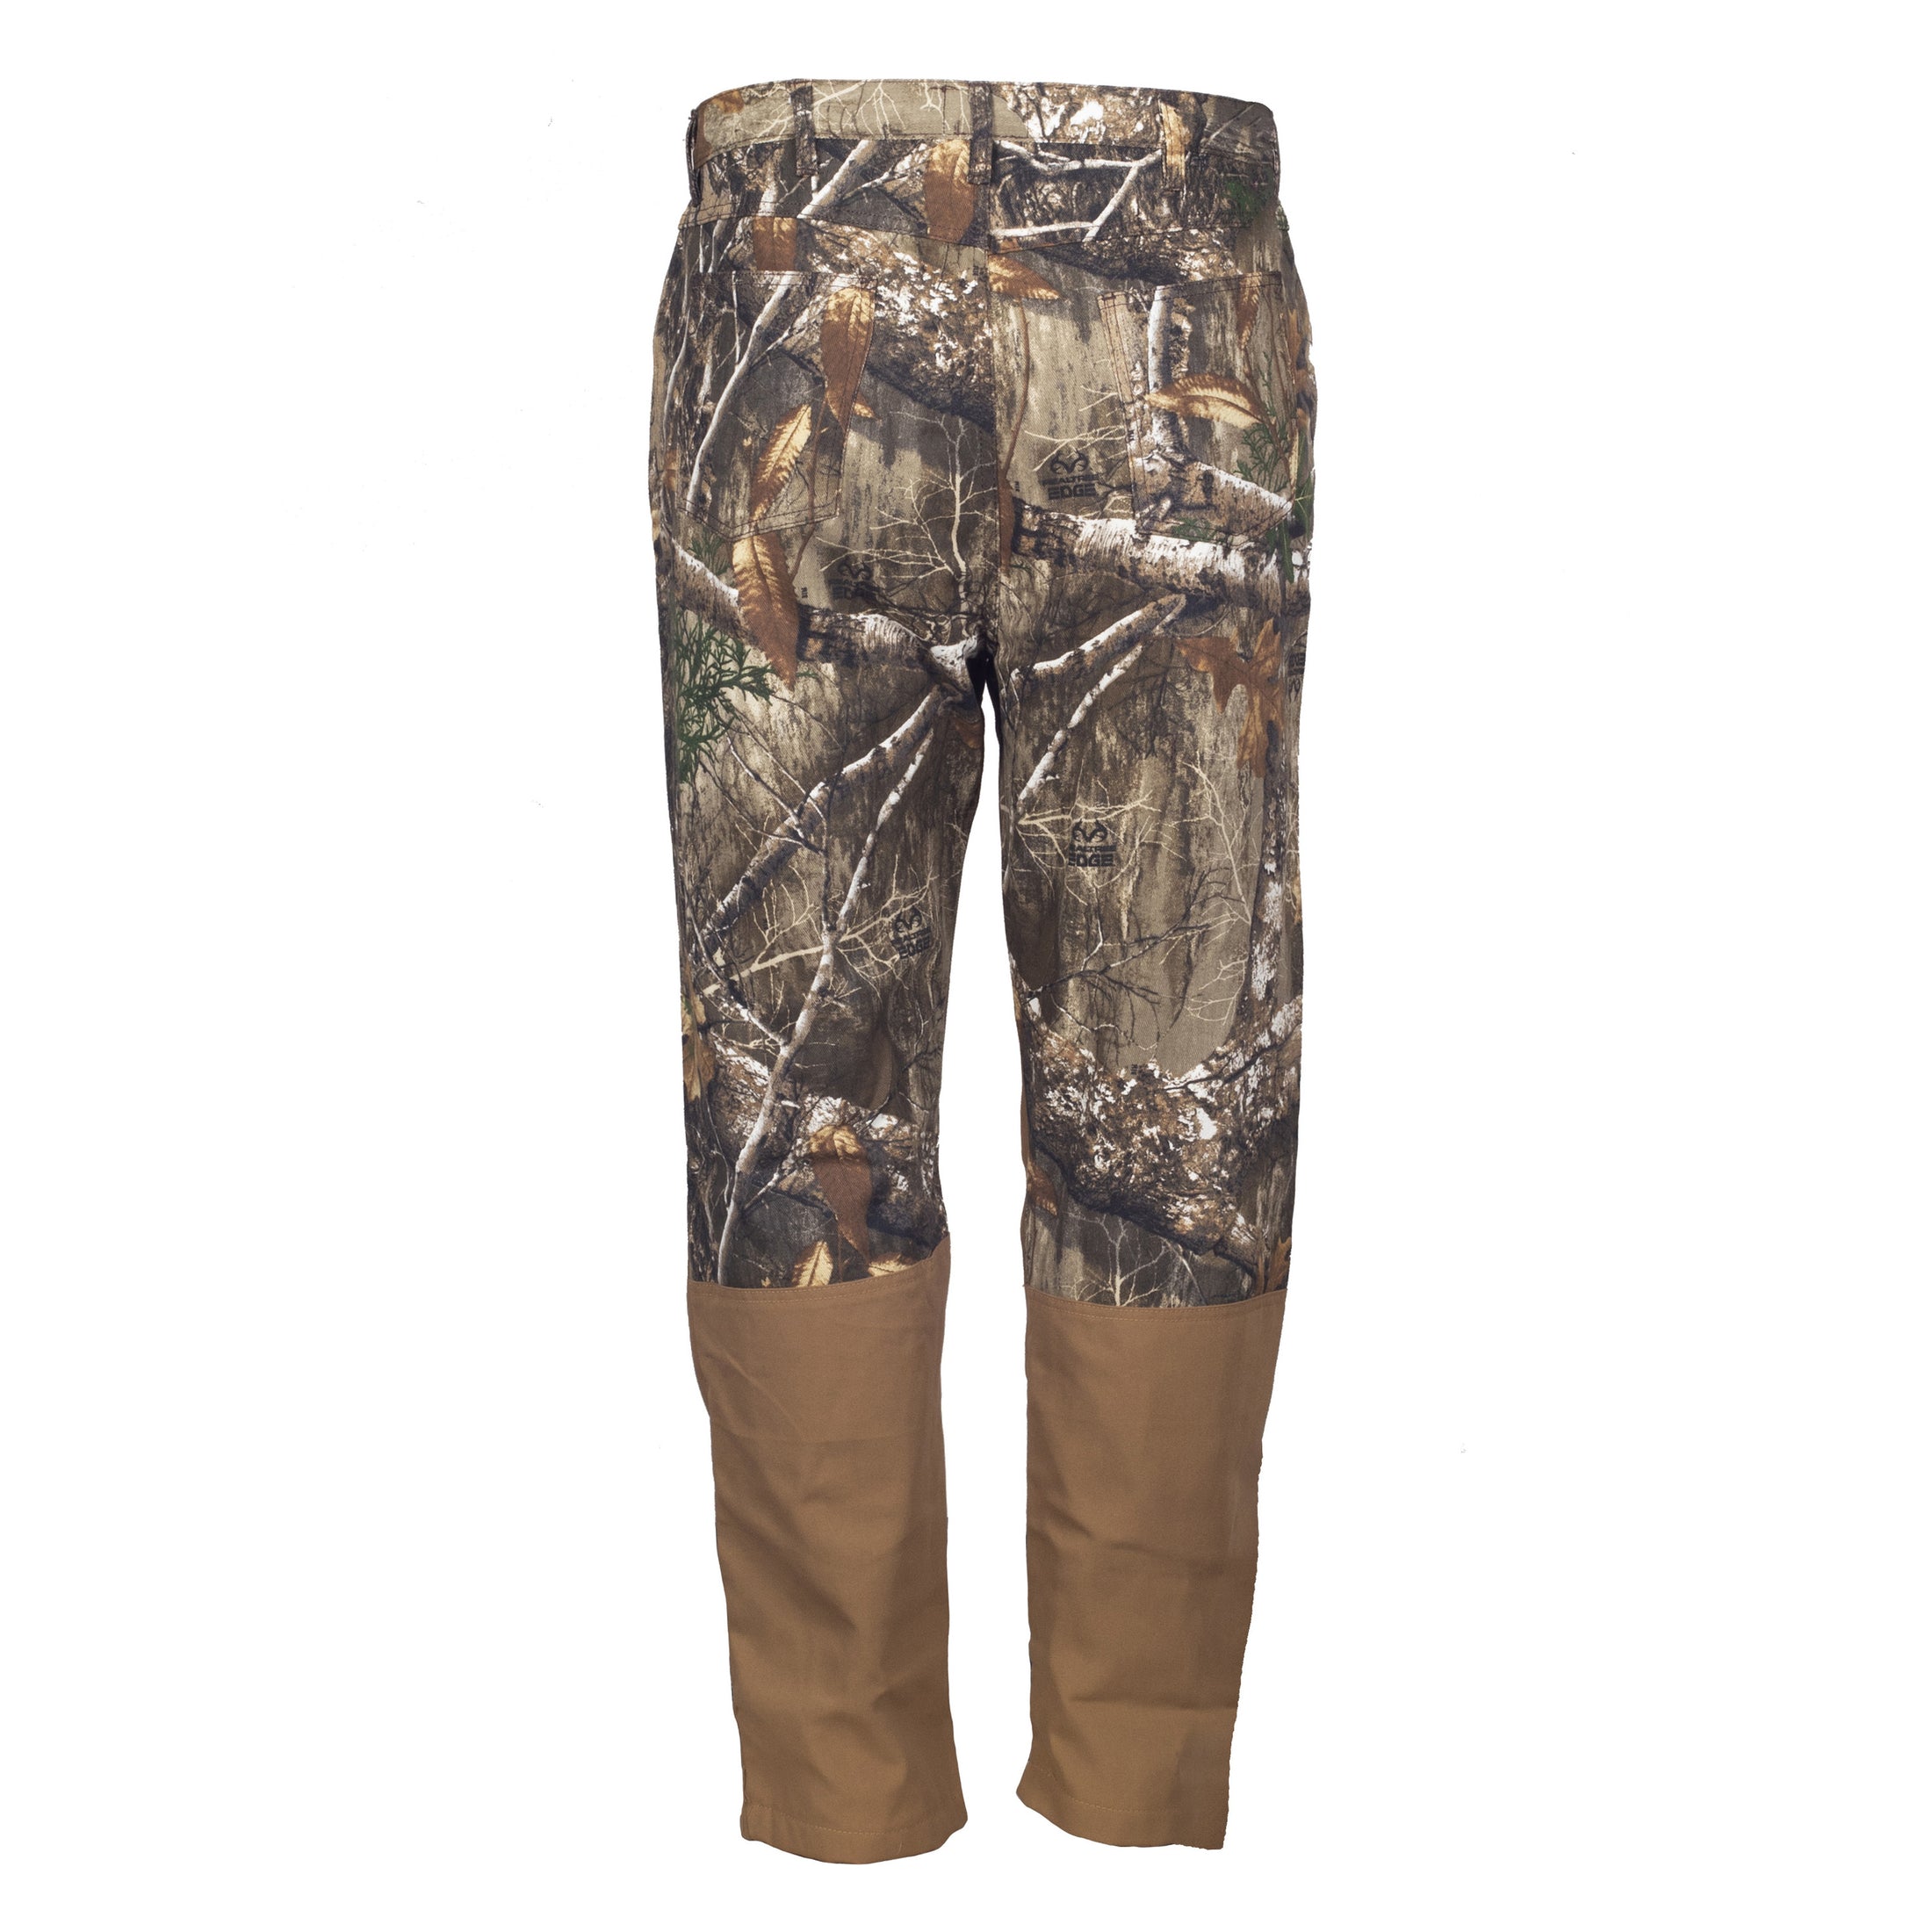 gamehide woodsman upland hunting jeans back view (realtree edge)